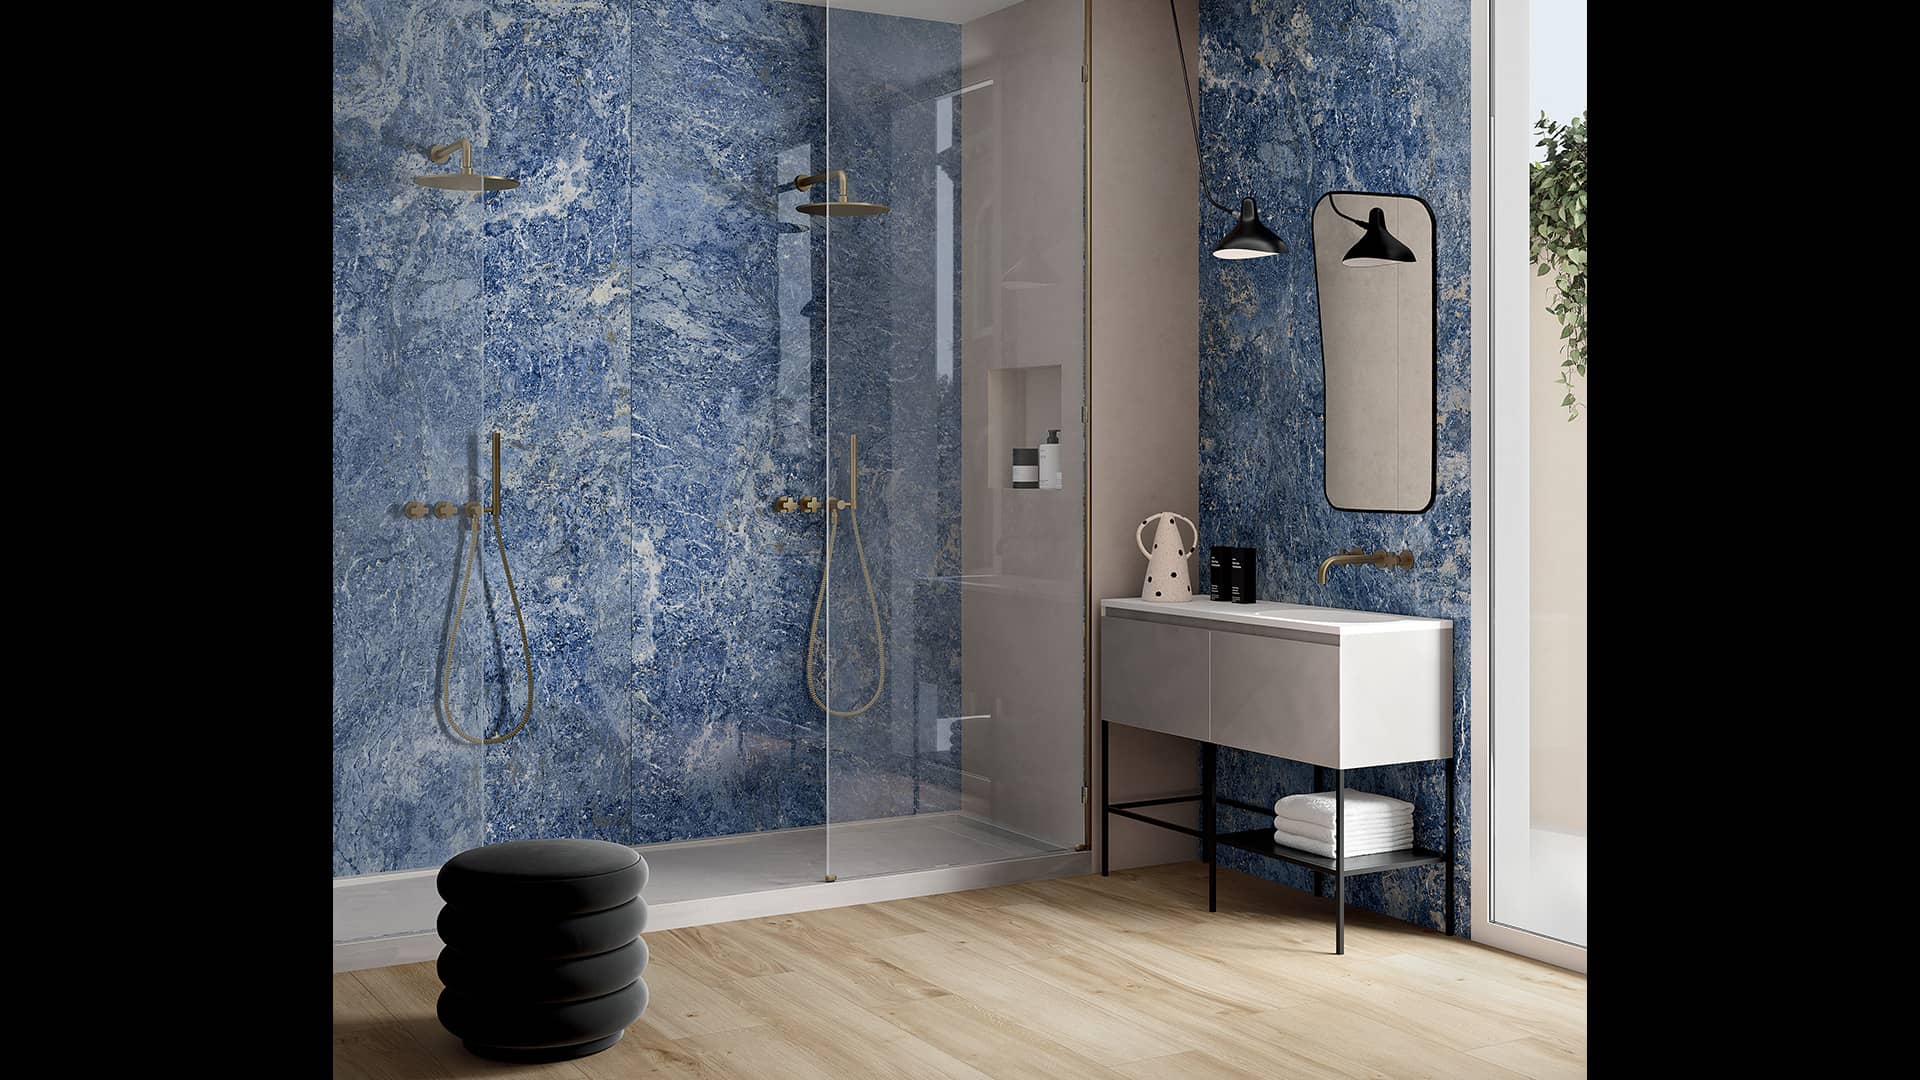 Ceramica Fondovalle plays with texture, shape, and colour at Cersaie 2021